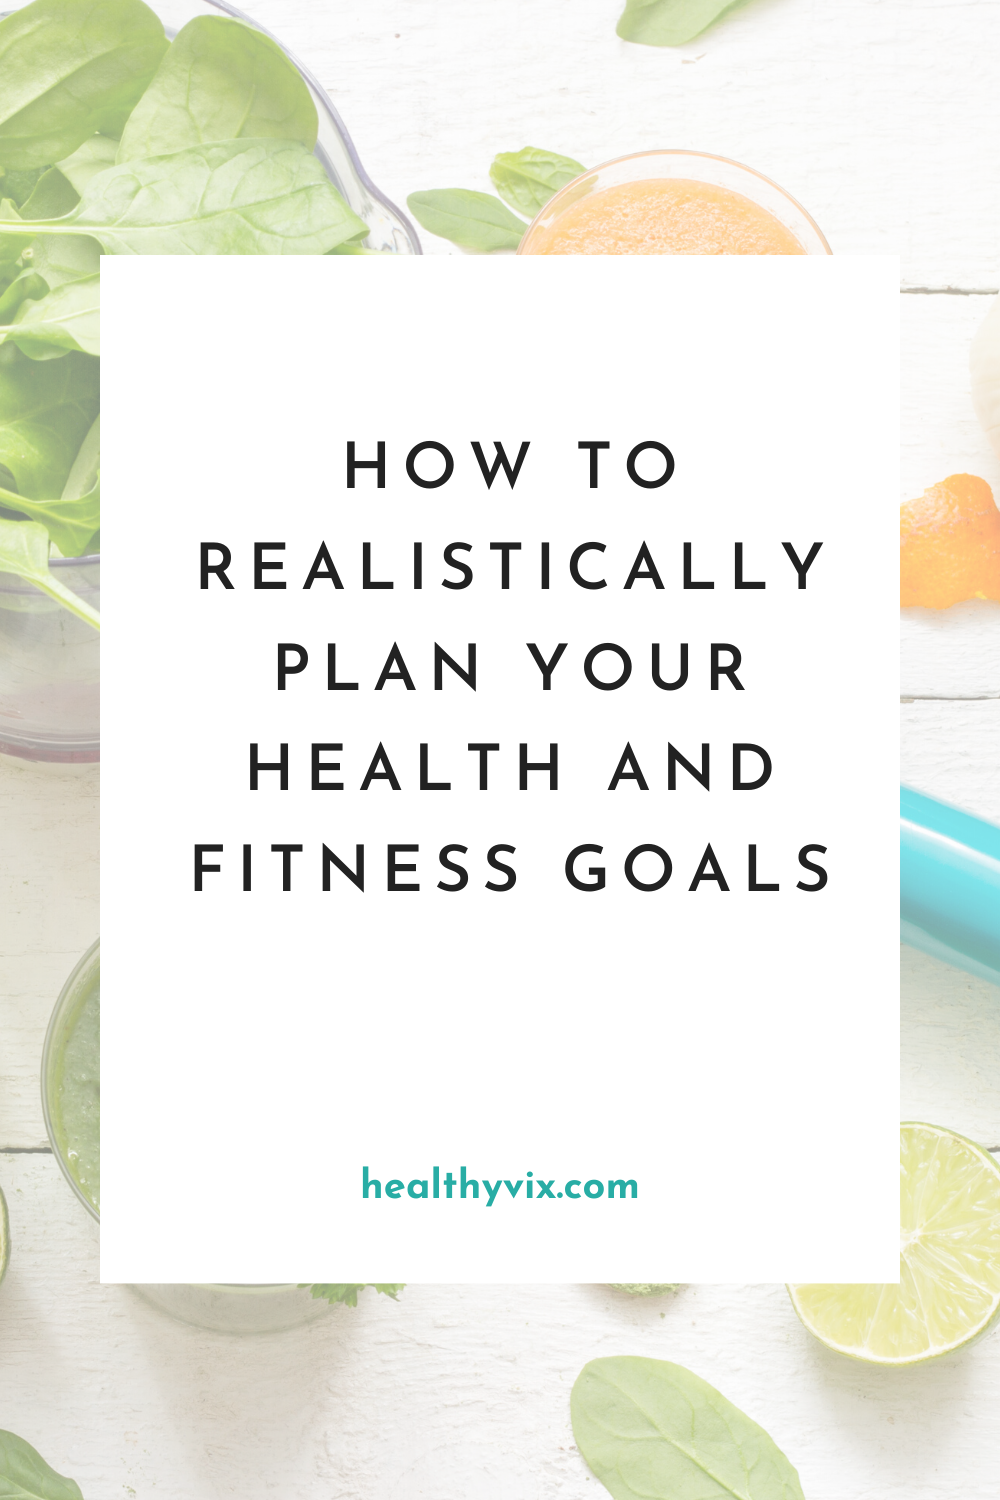 How to realistically plan your health and fitness goals (2)